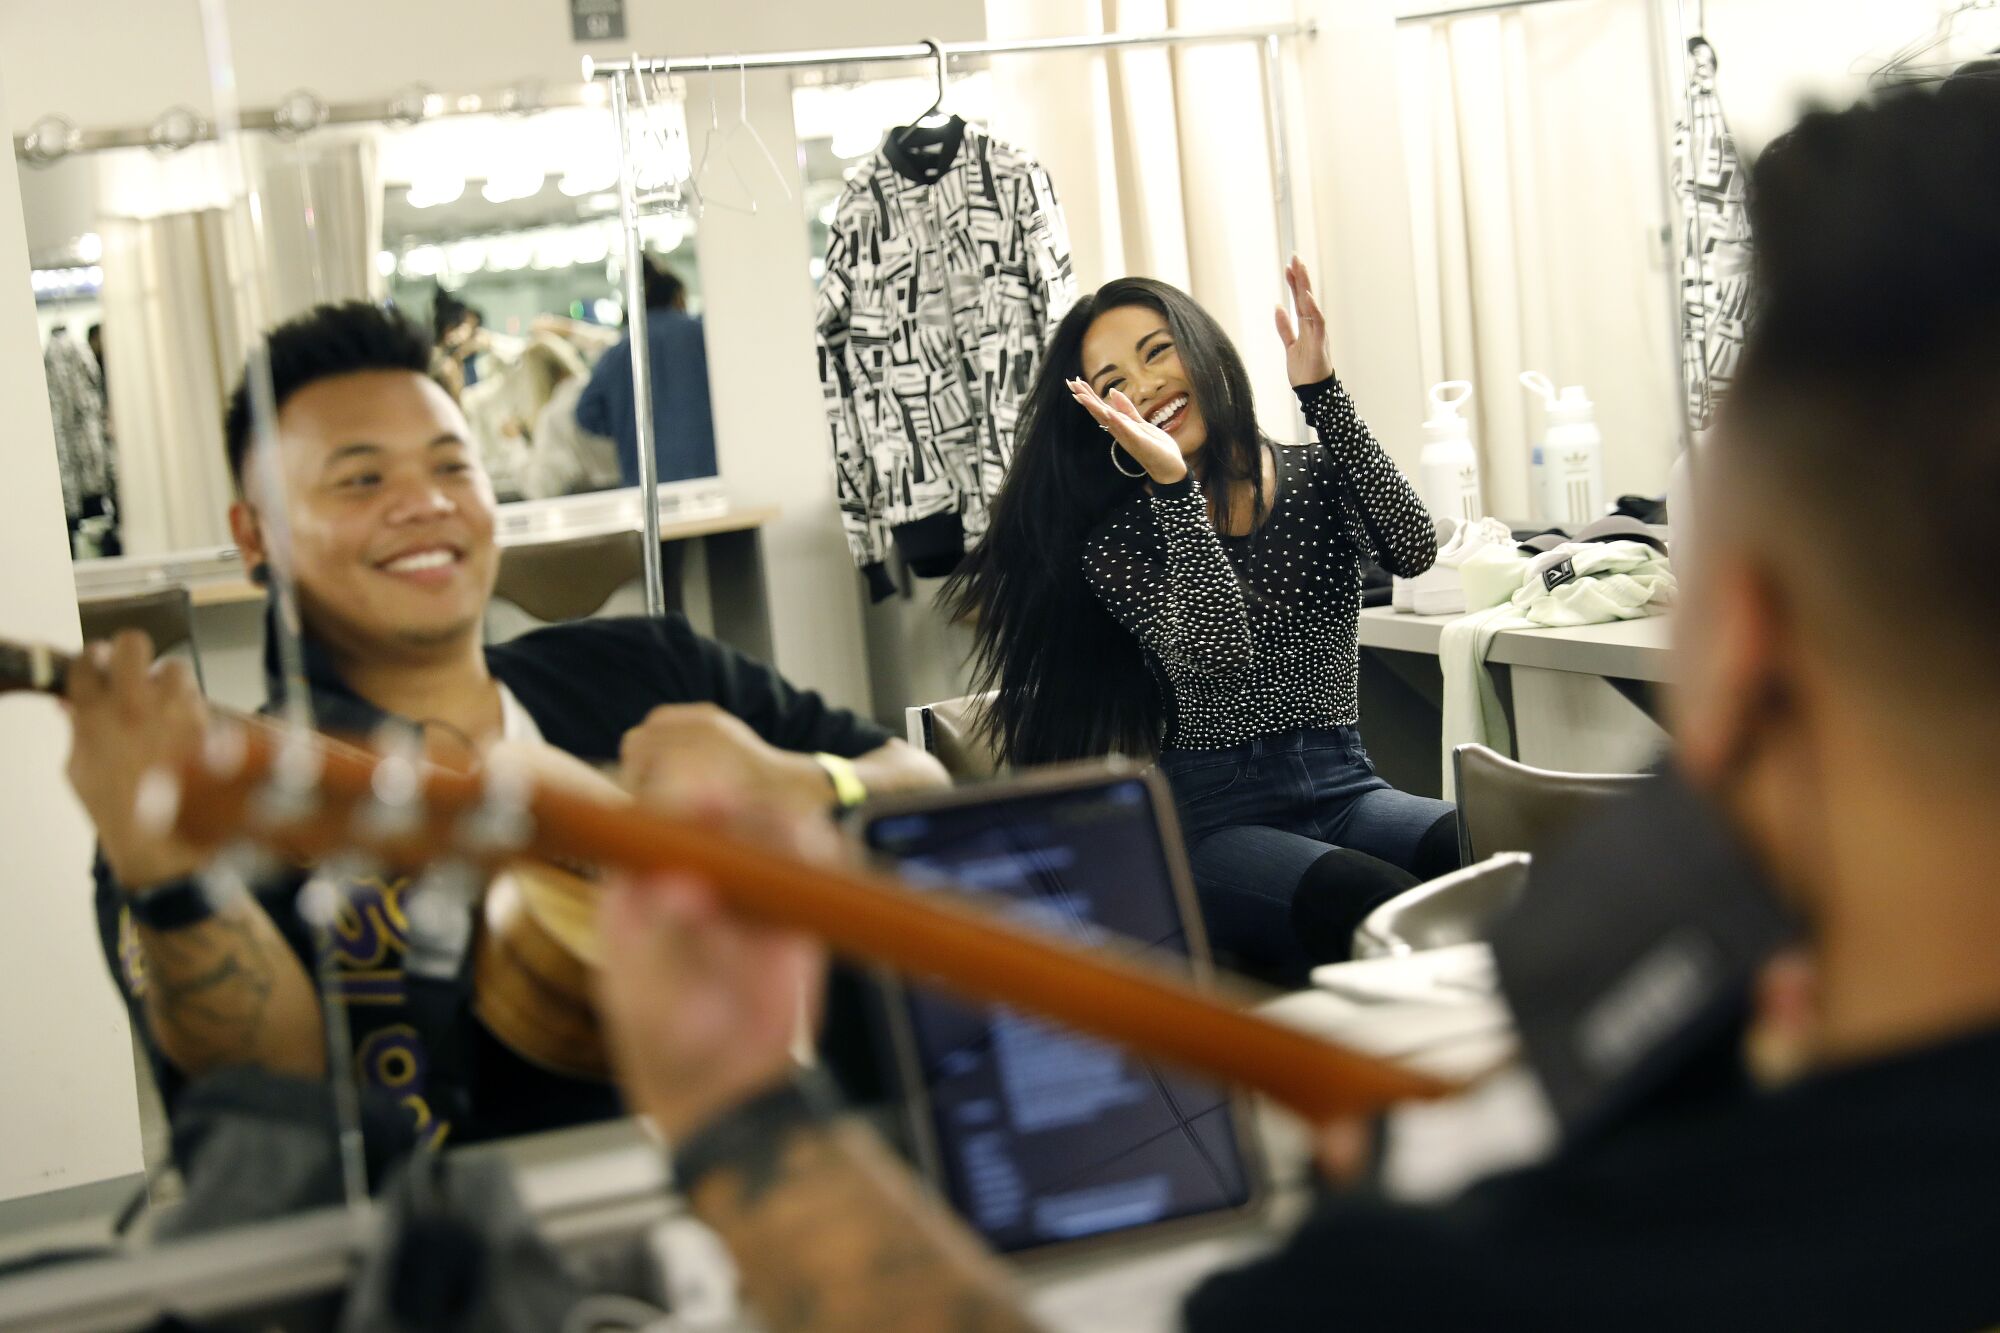 AJ Rafael and Jules Aurora sing a song in a dressing room.